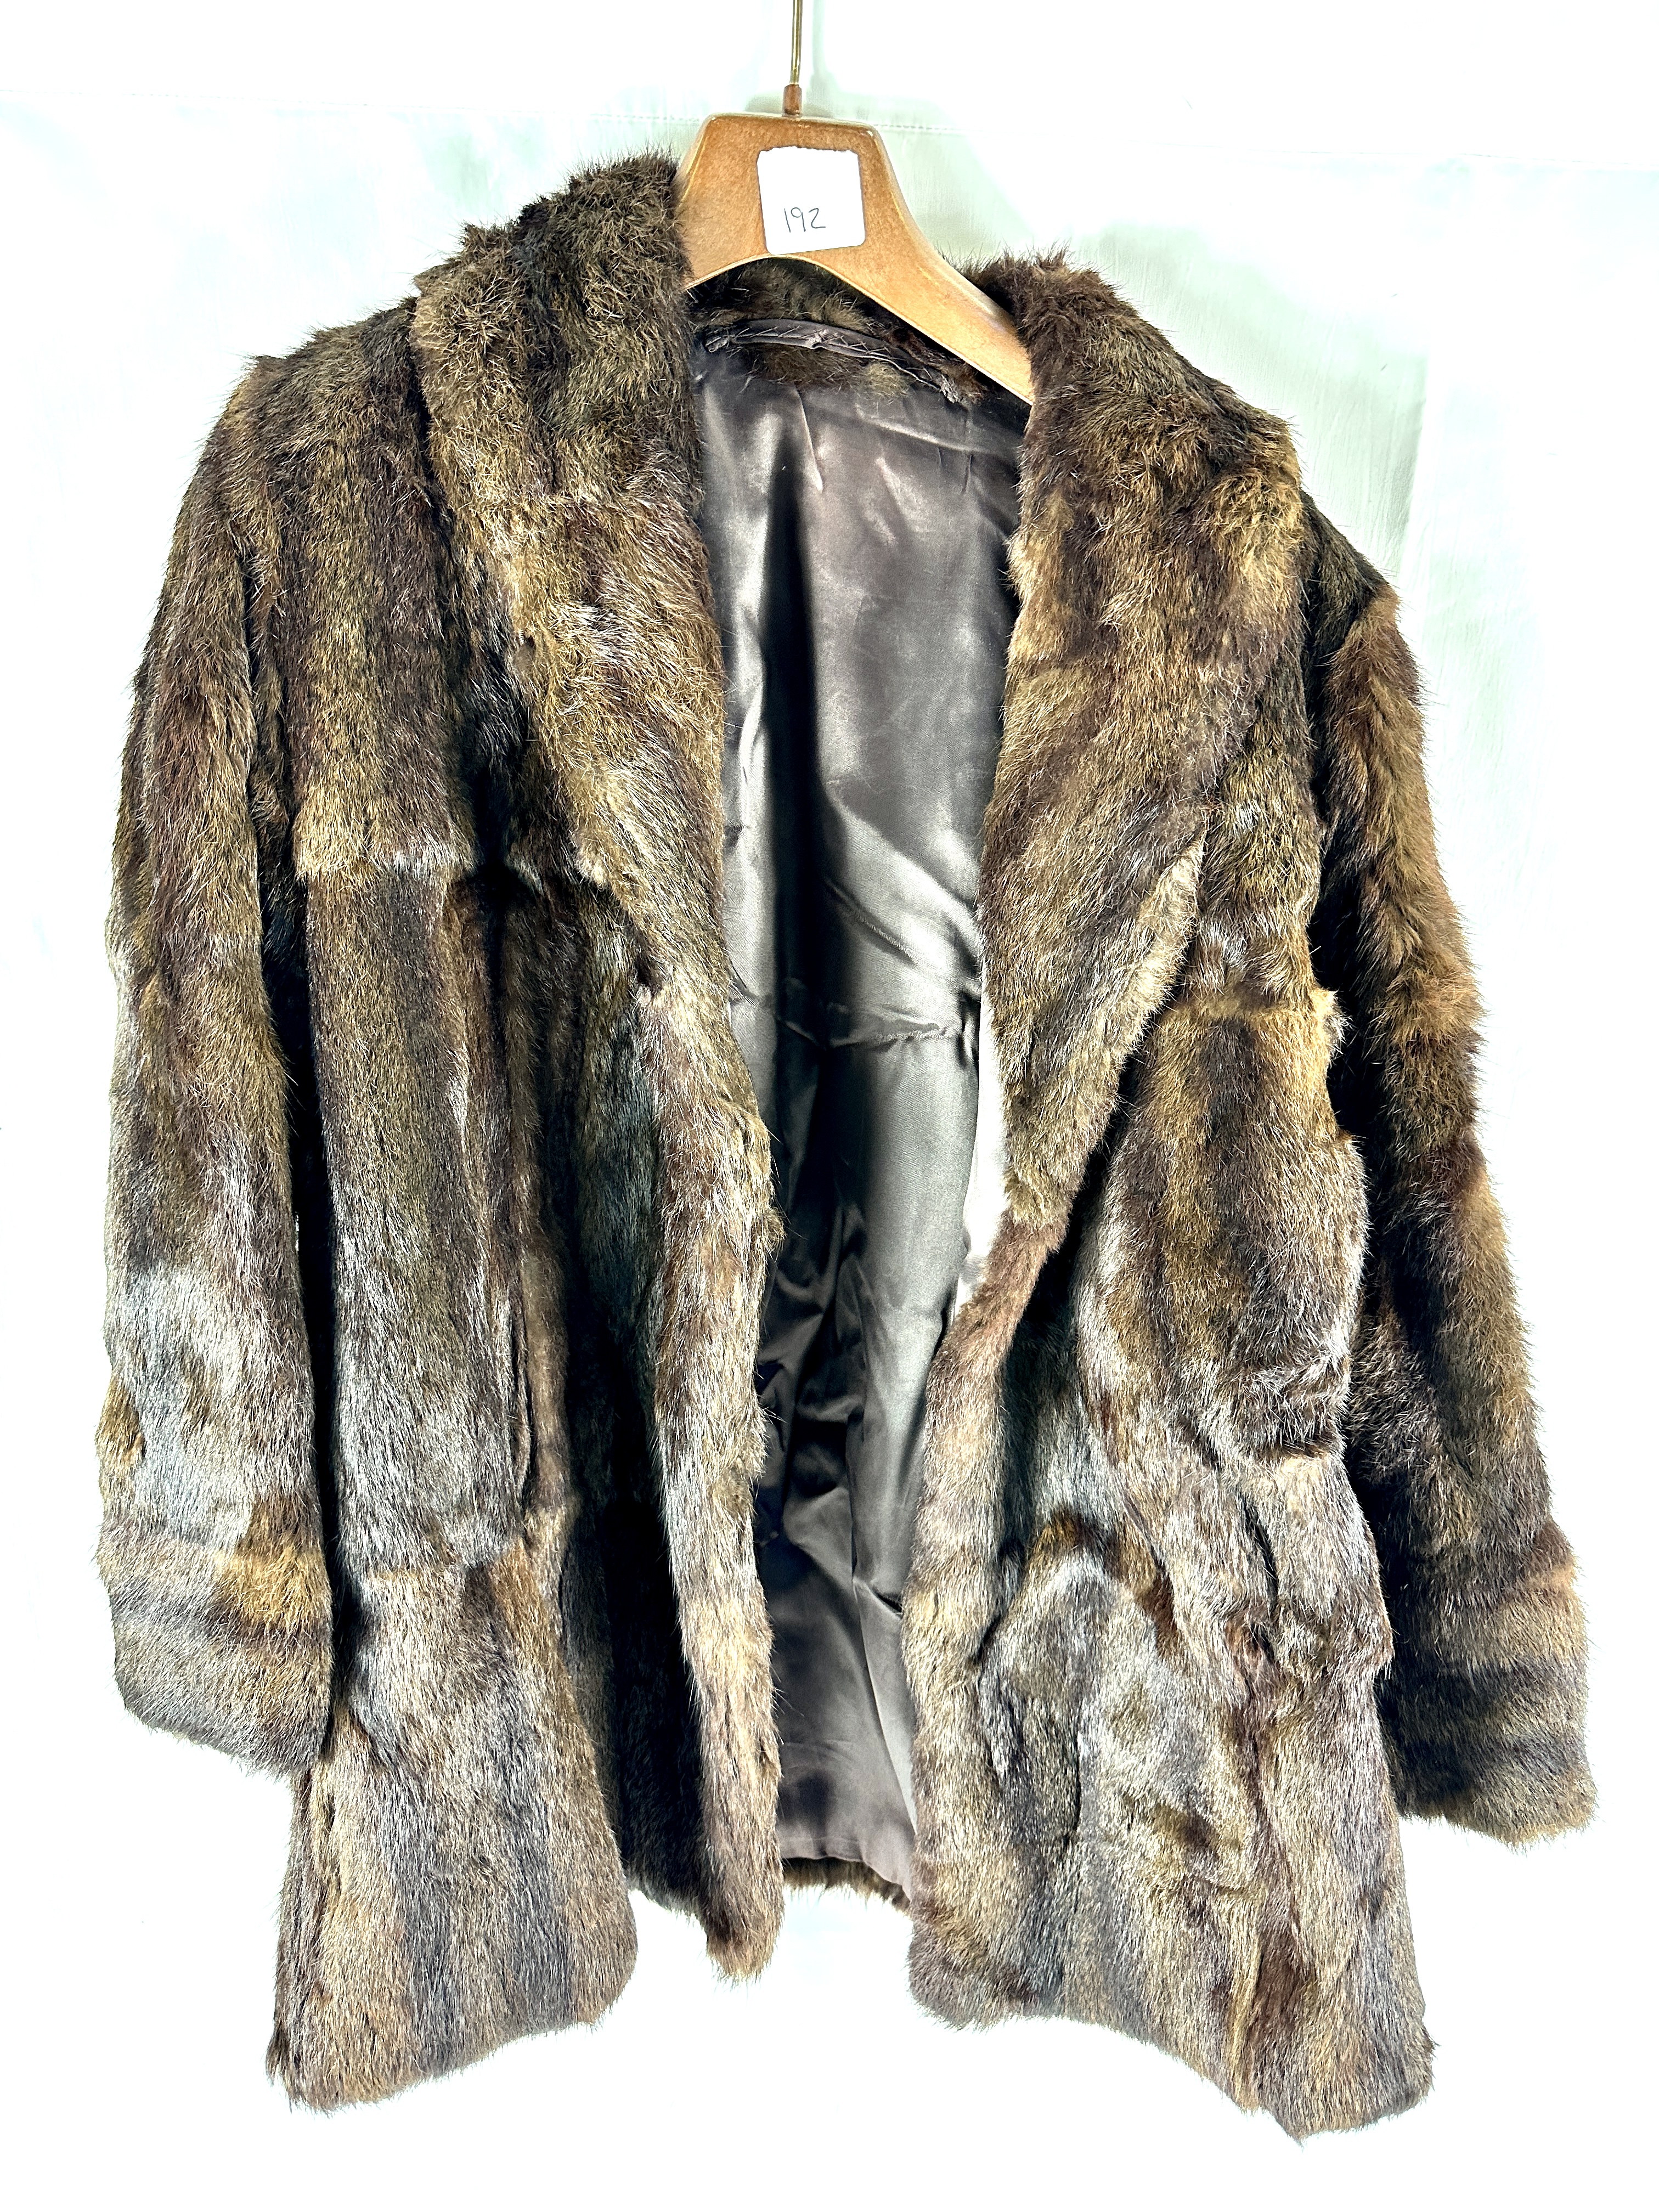 A fur coat and fur stole - Image 2 of 5